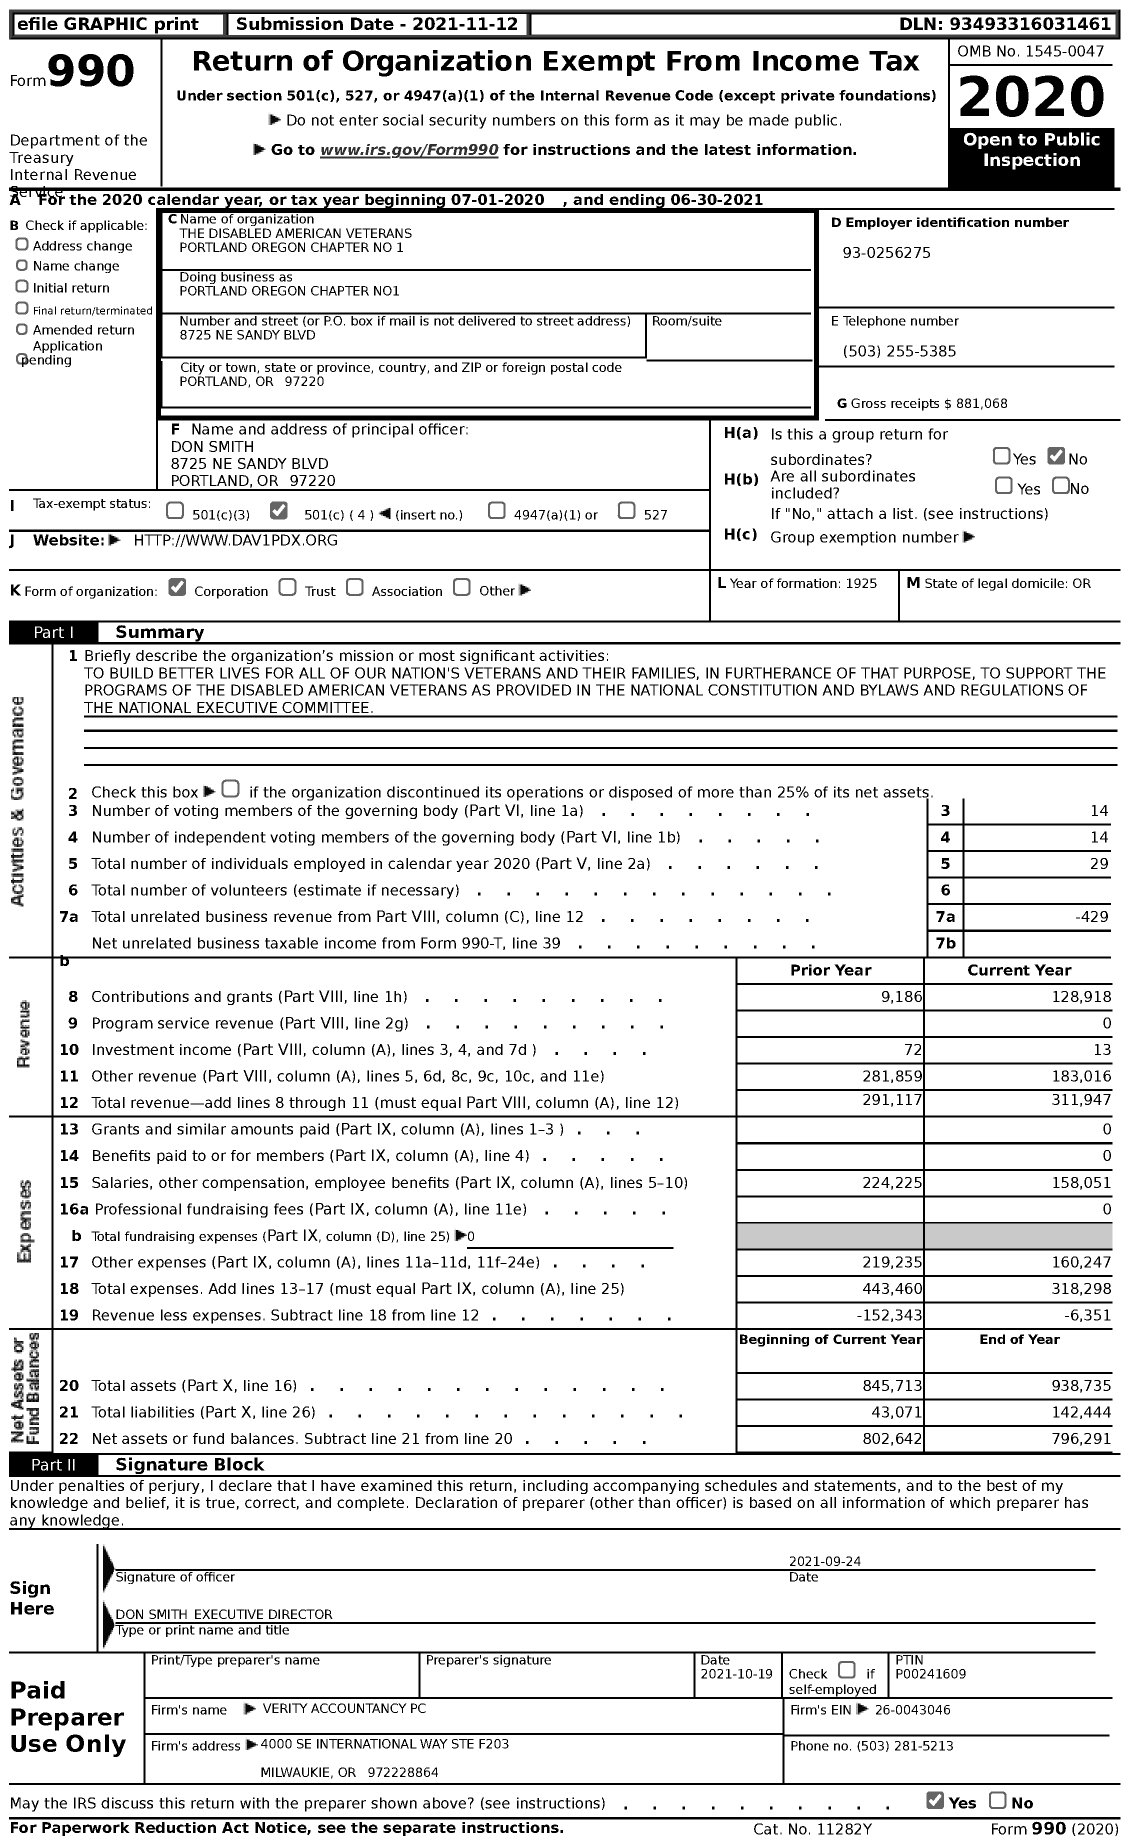 Image of first page of 2020 Form 990 for Disabled American Veterans - Portland Oregon Chapter No1